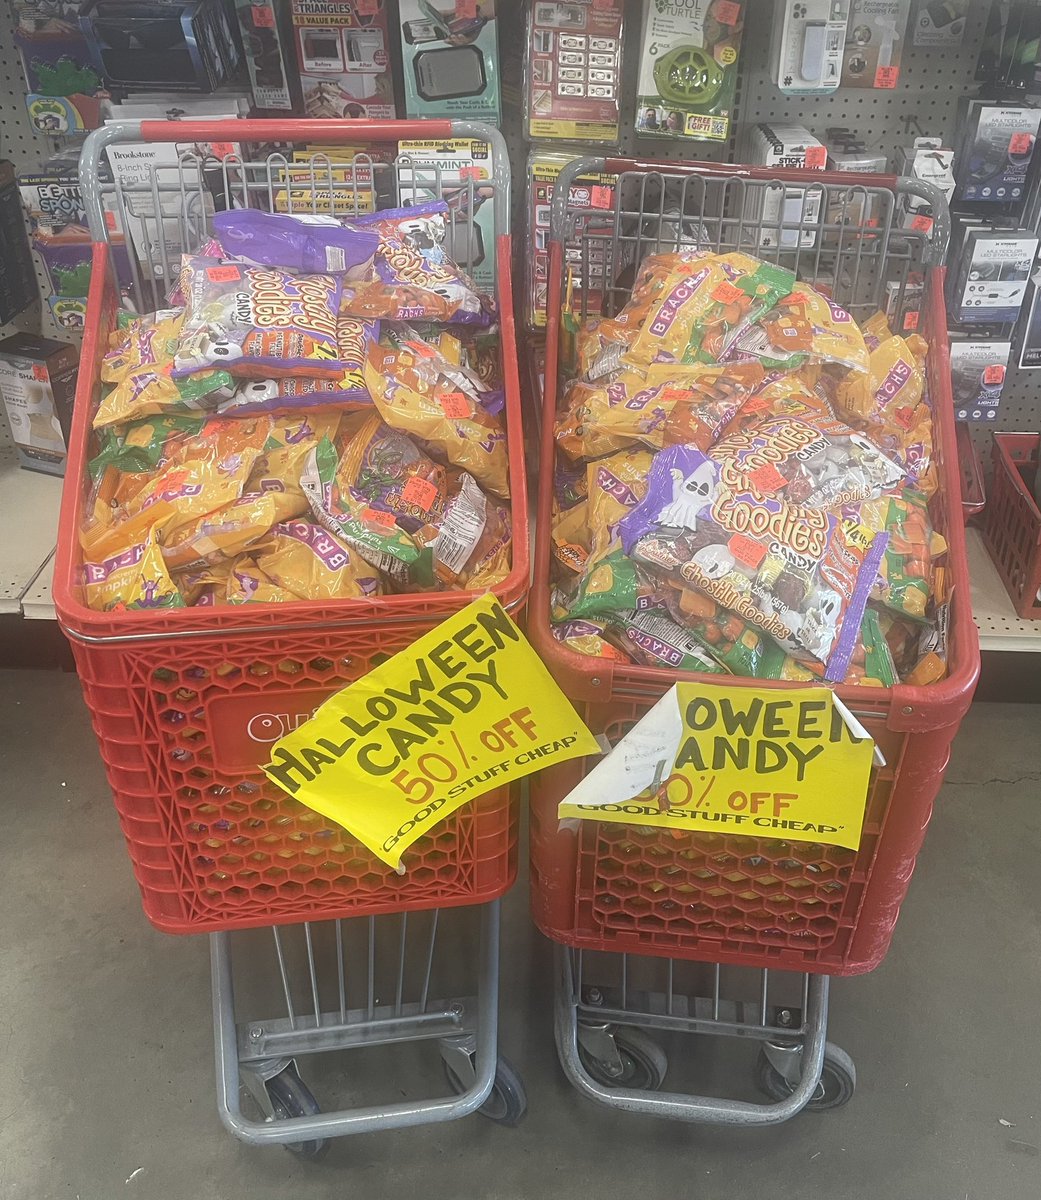 50% off clearance Halloween candy -checks calendar- in May!? What multiverse am I in?